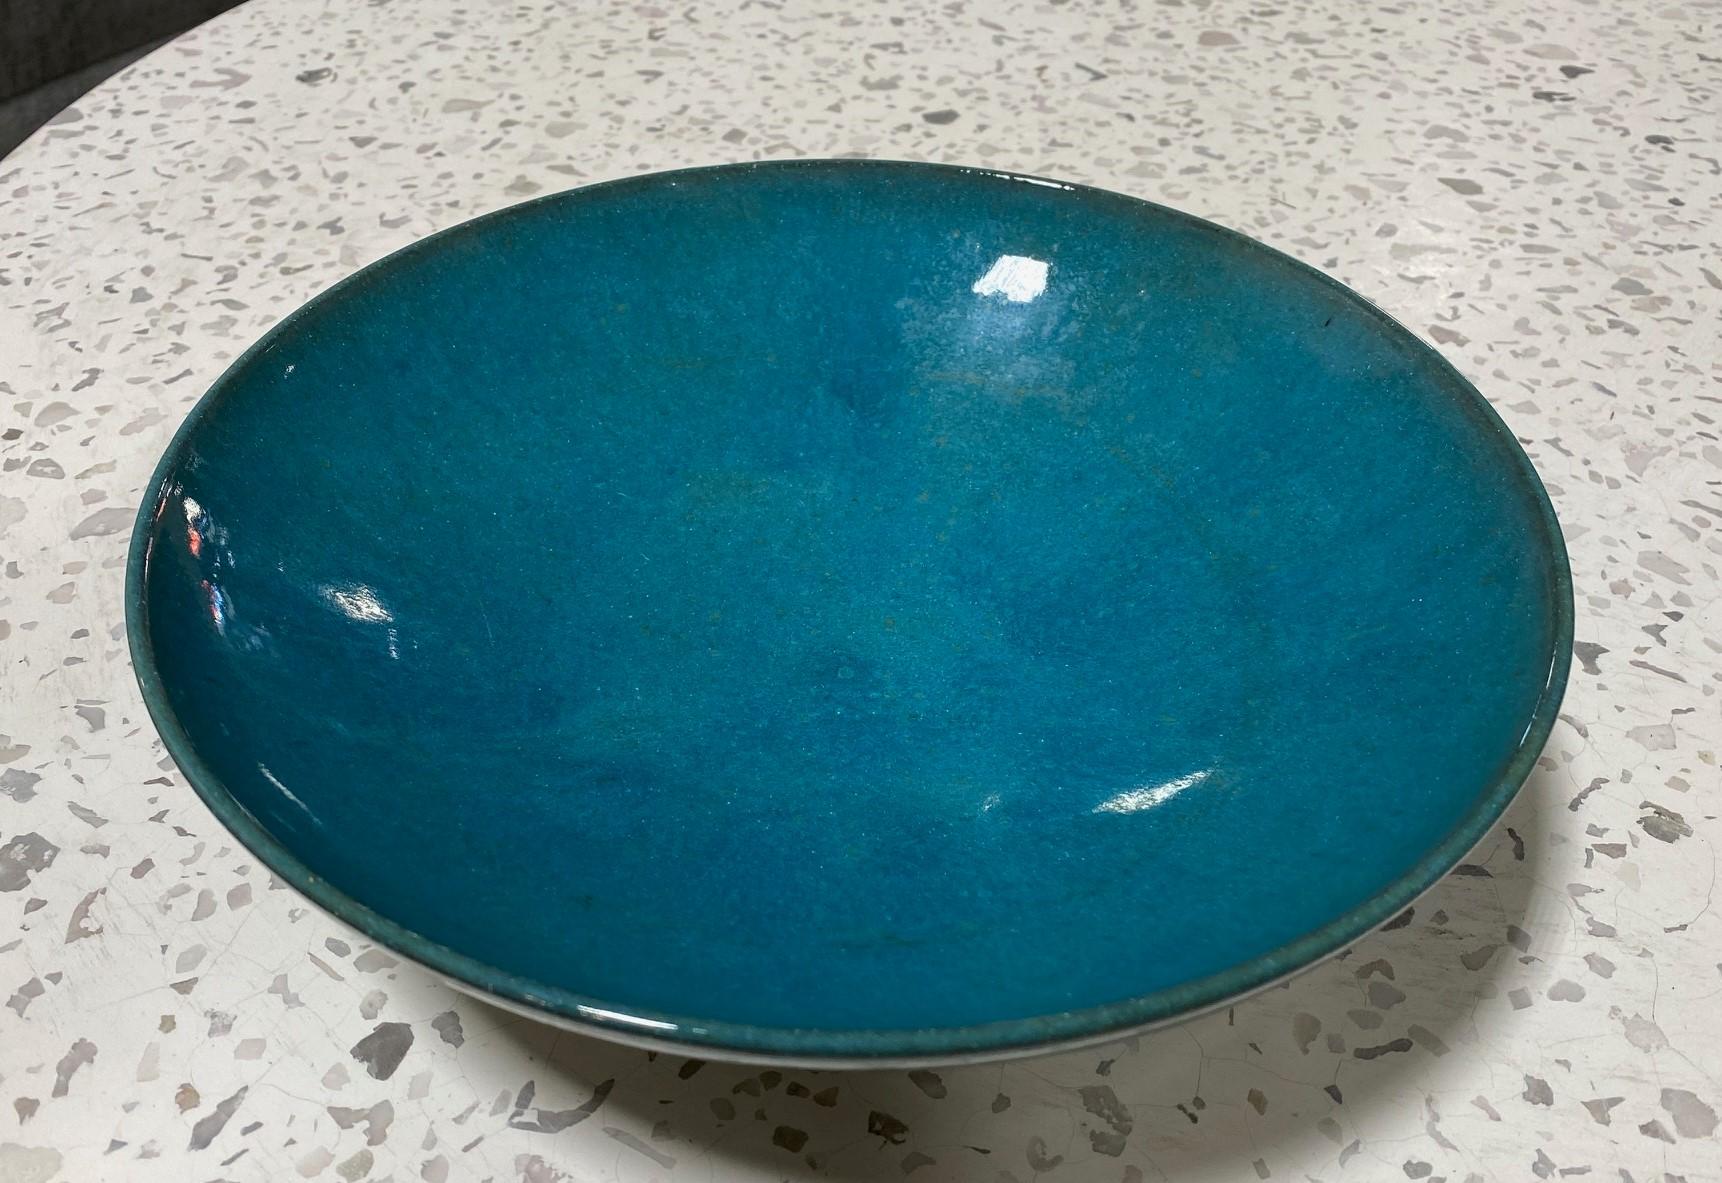 A truly gorgeous and wonderfully crafted large art bowl by Swiss American sculptor/artist/ceramicist Paul Ami Bonifas (1893-1967). The glaze on this particular piece is exquisite with different shades of blue ranging from turquoise to navy depending